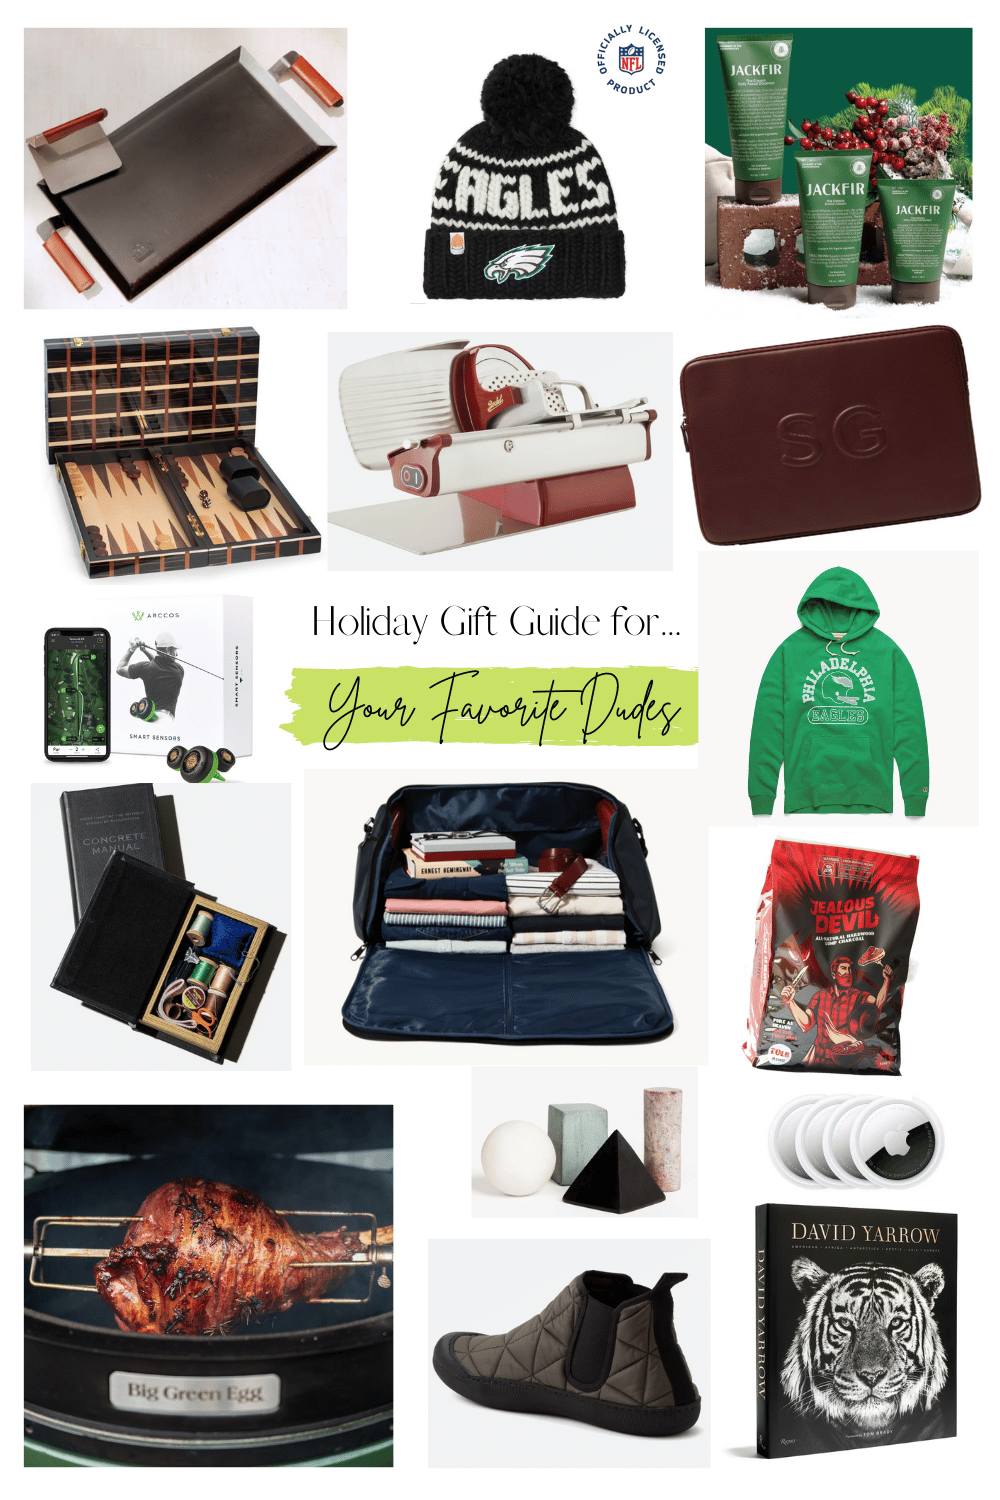 Gift Ideas for the Hard-to-Buy-For Man // Holiday Gift Guide by Marigo